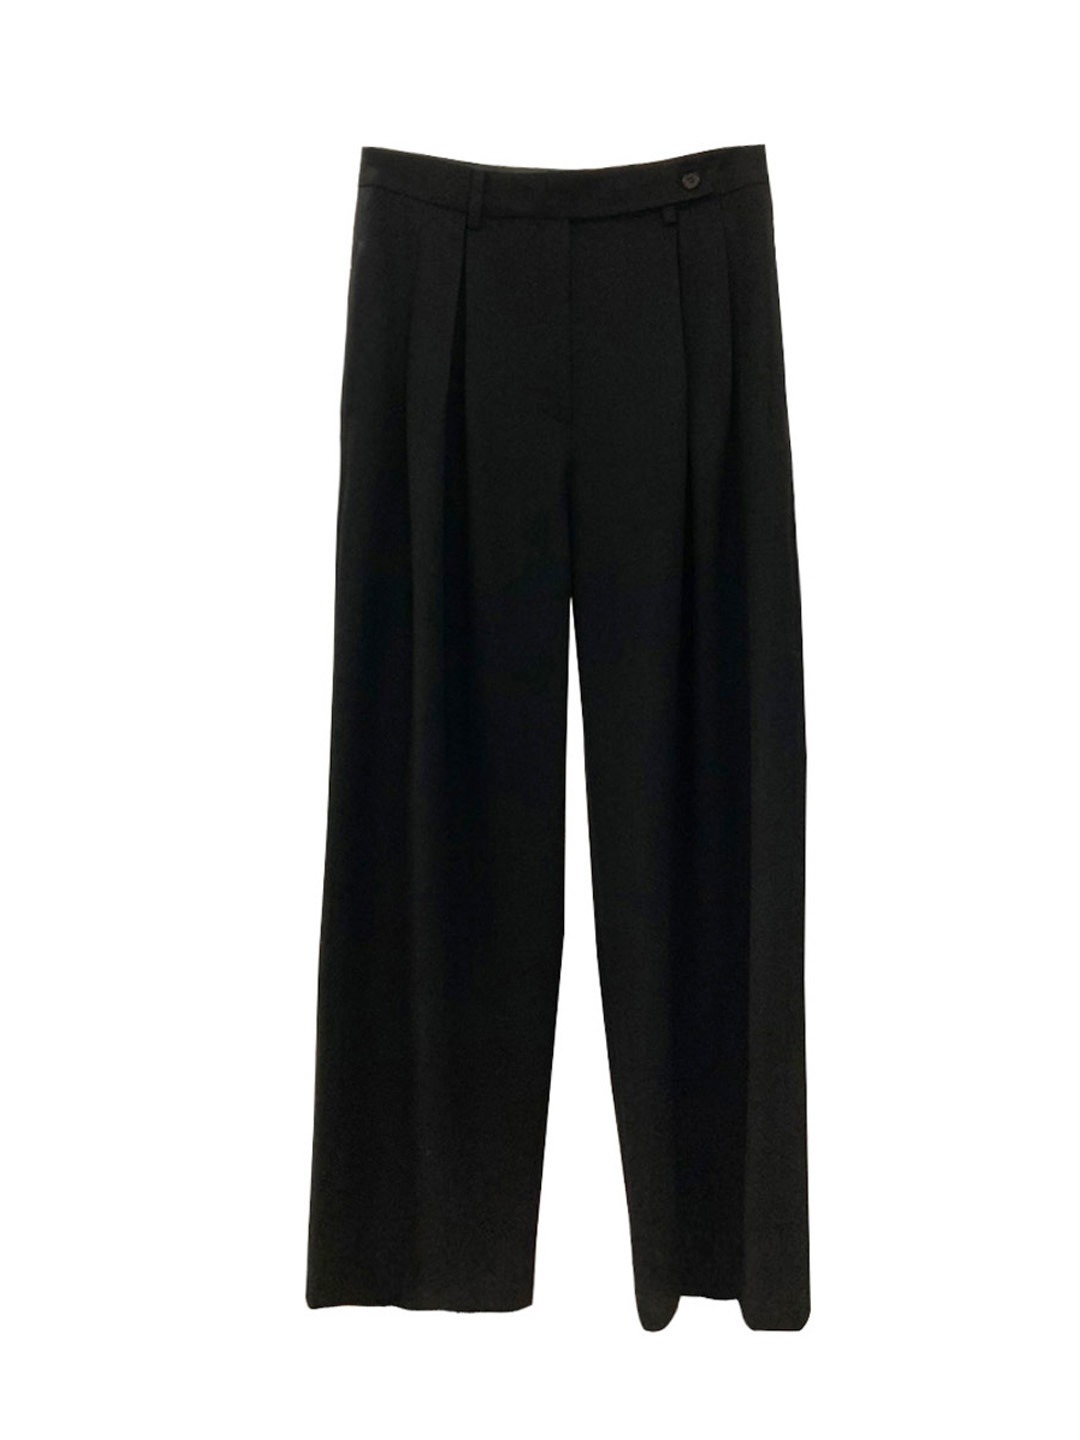 153. Wide Fit Tailored Pants / 와이드 핏 테일러드 팬츠